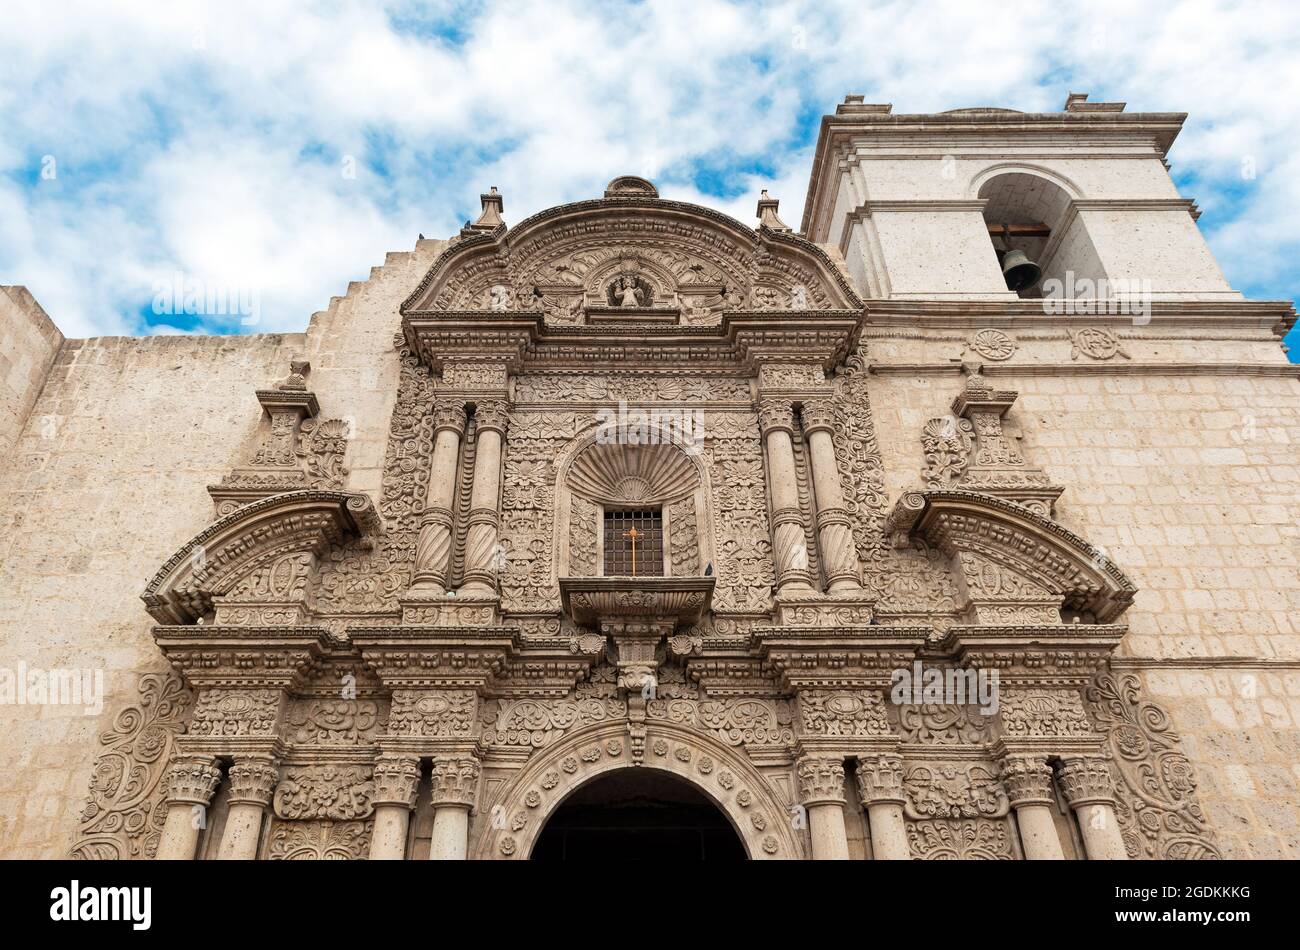 Jesuit monastery facade in indigenous baroque style made of white volcanic sillar stone, Arequipa, Peru. Stock Photo